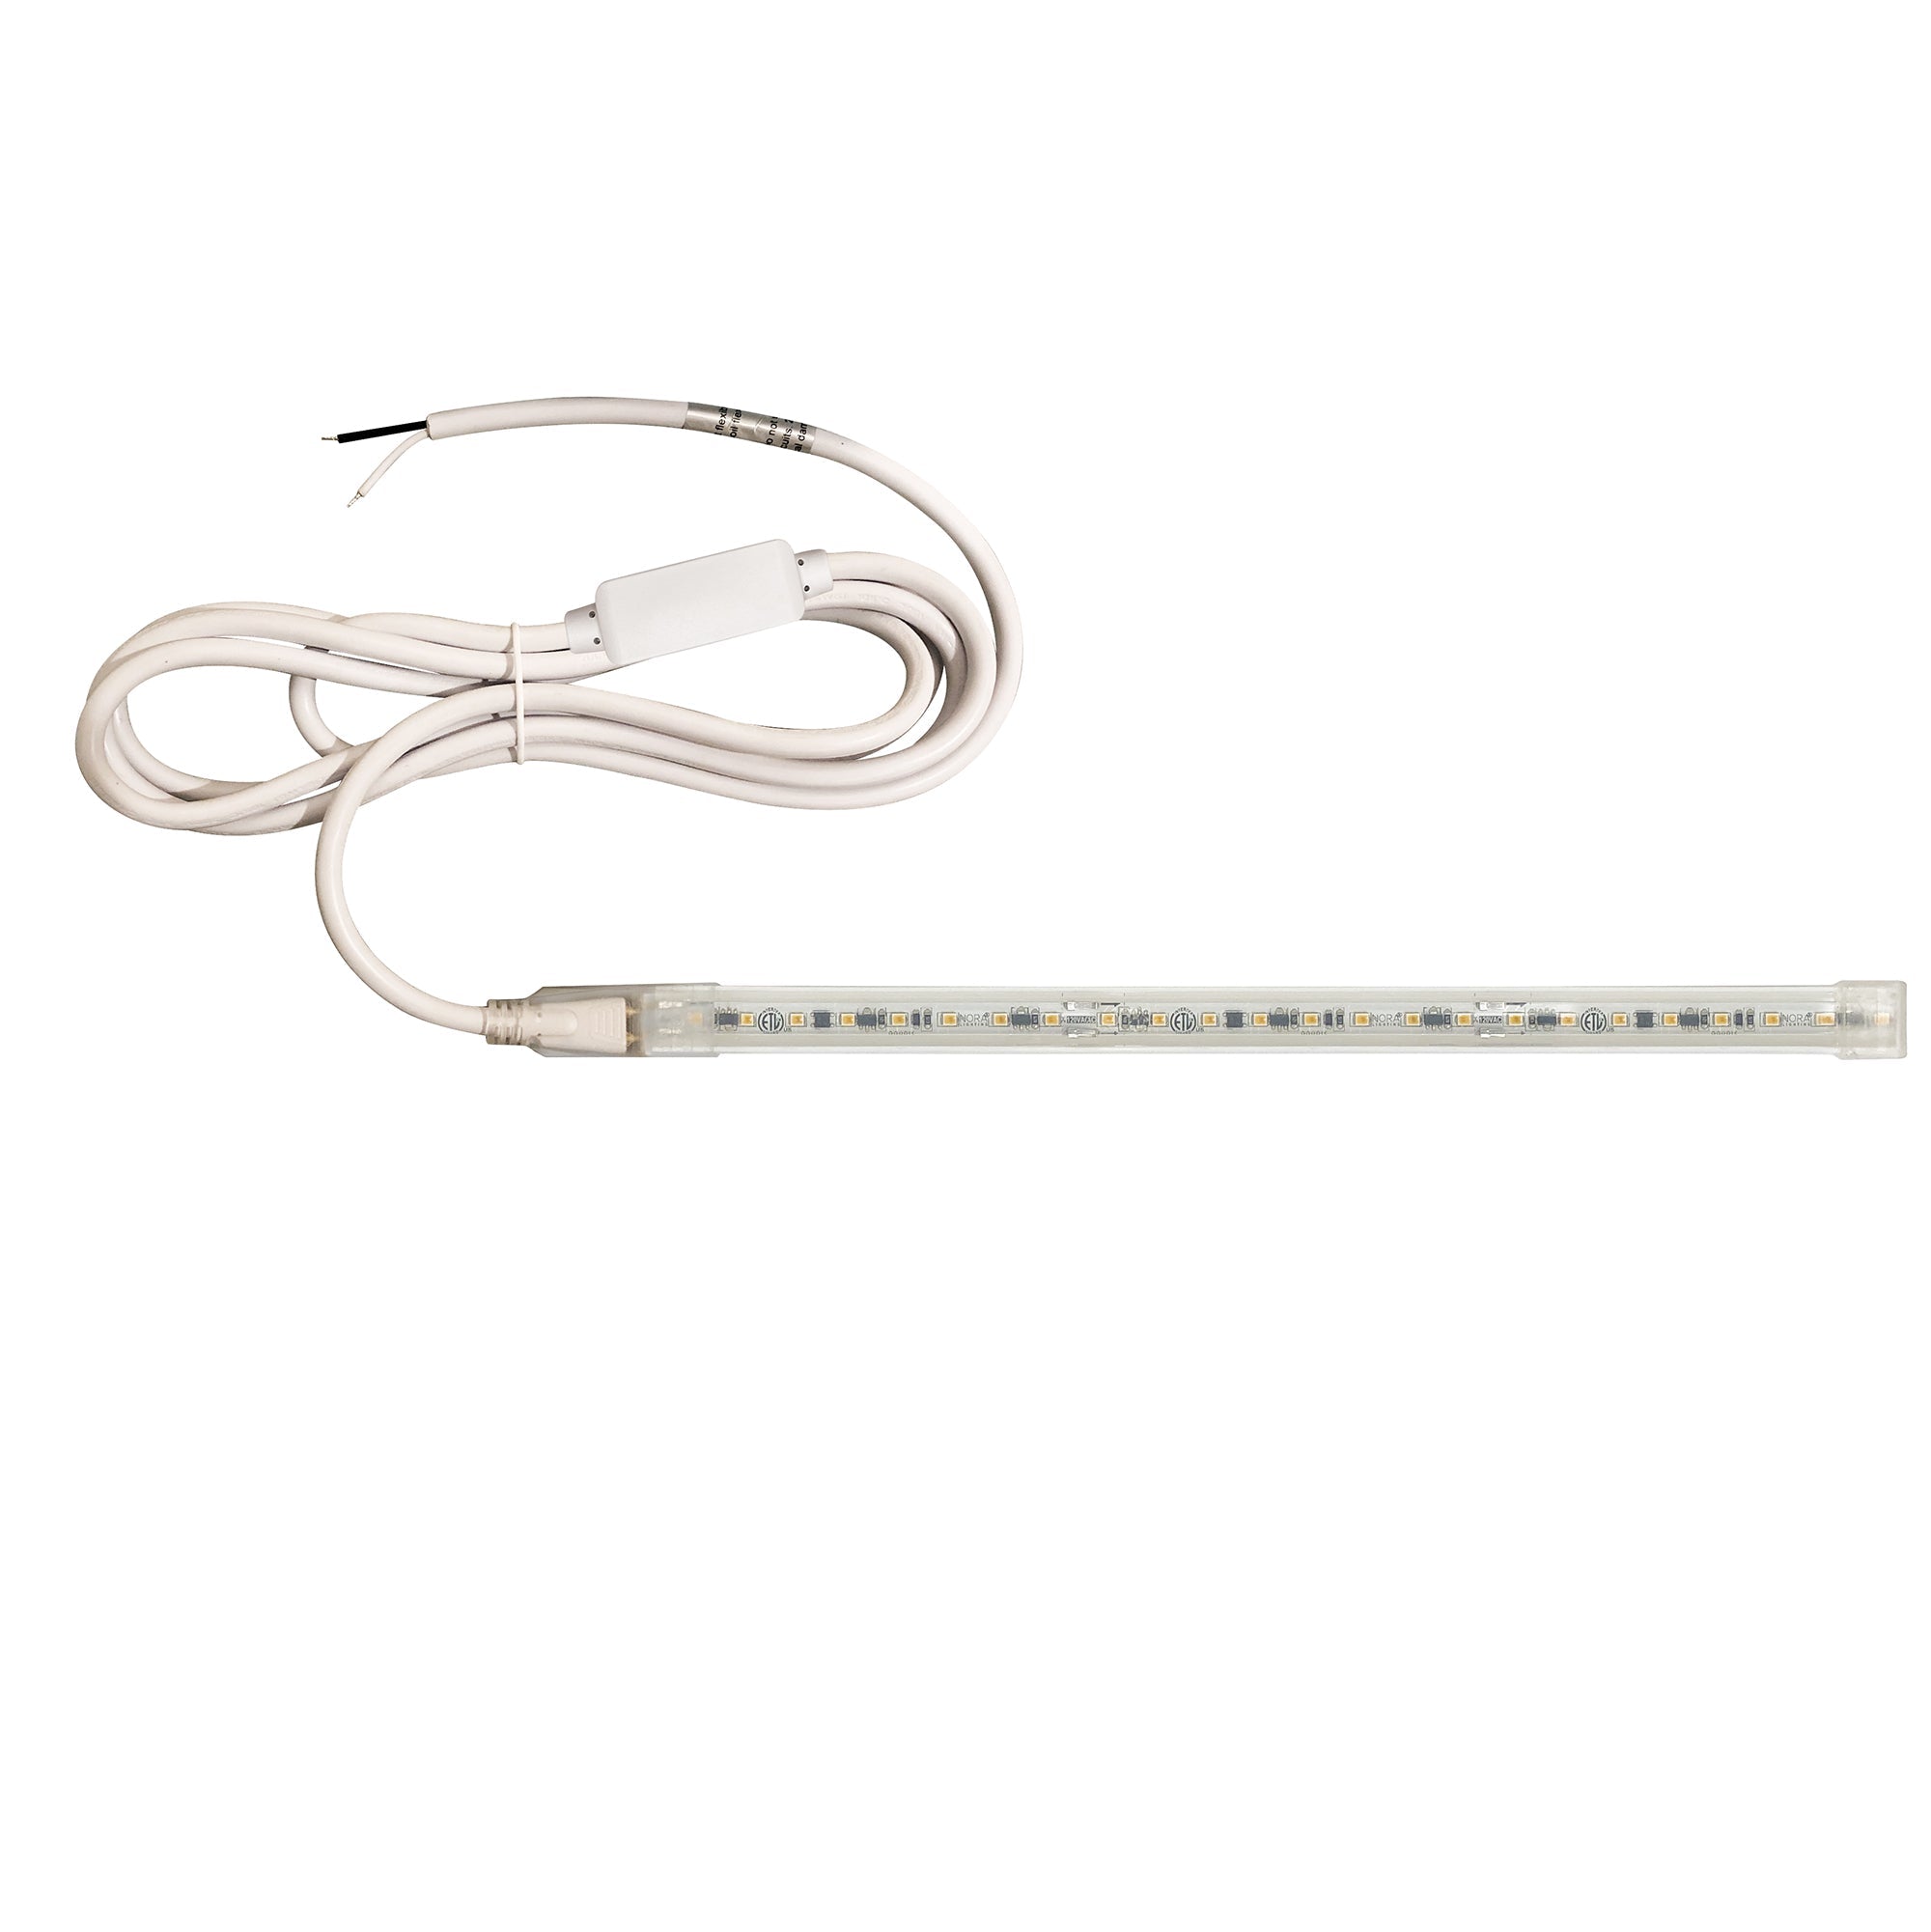 Nora Lighting NUTP13-W71-4-12-930/HWSP - Accent / Undercabinet - Custom Cut 71-ft, 4-in 120V Continuous LED Tape Light, 330lm / 3.6W per foot, 3000K, w/ Mounting Clips and 8' Hardwired Power Cord w/ Surge Protector